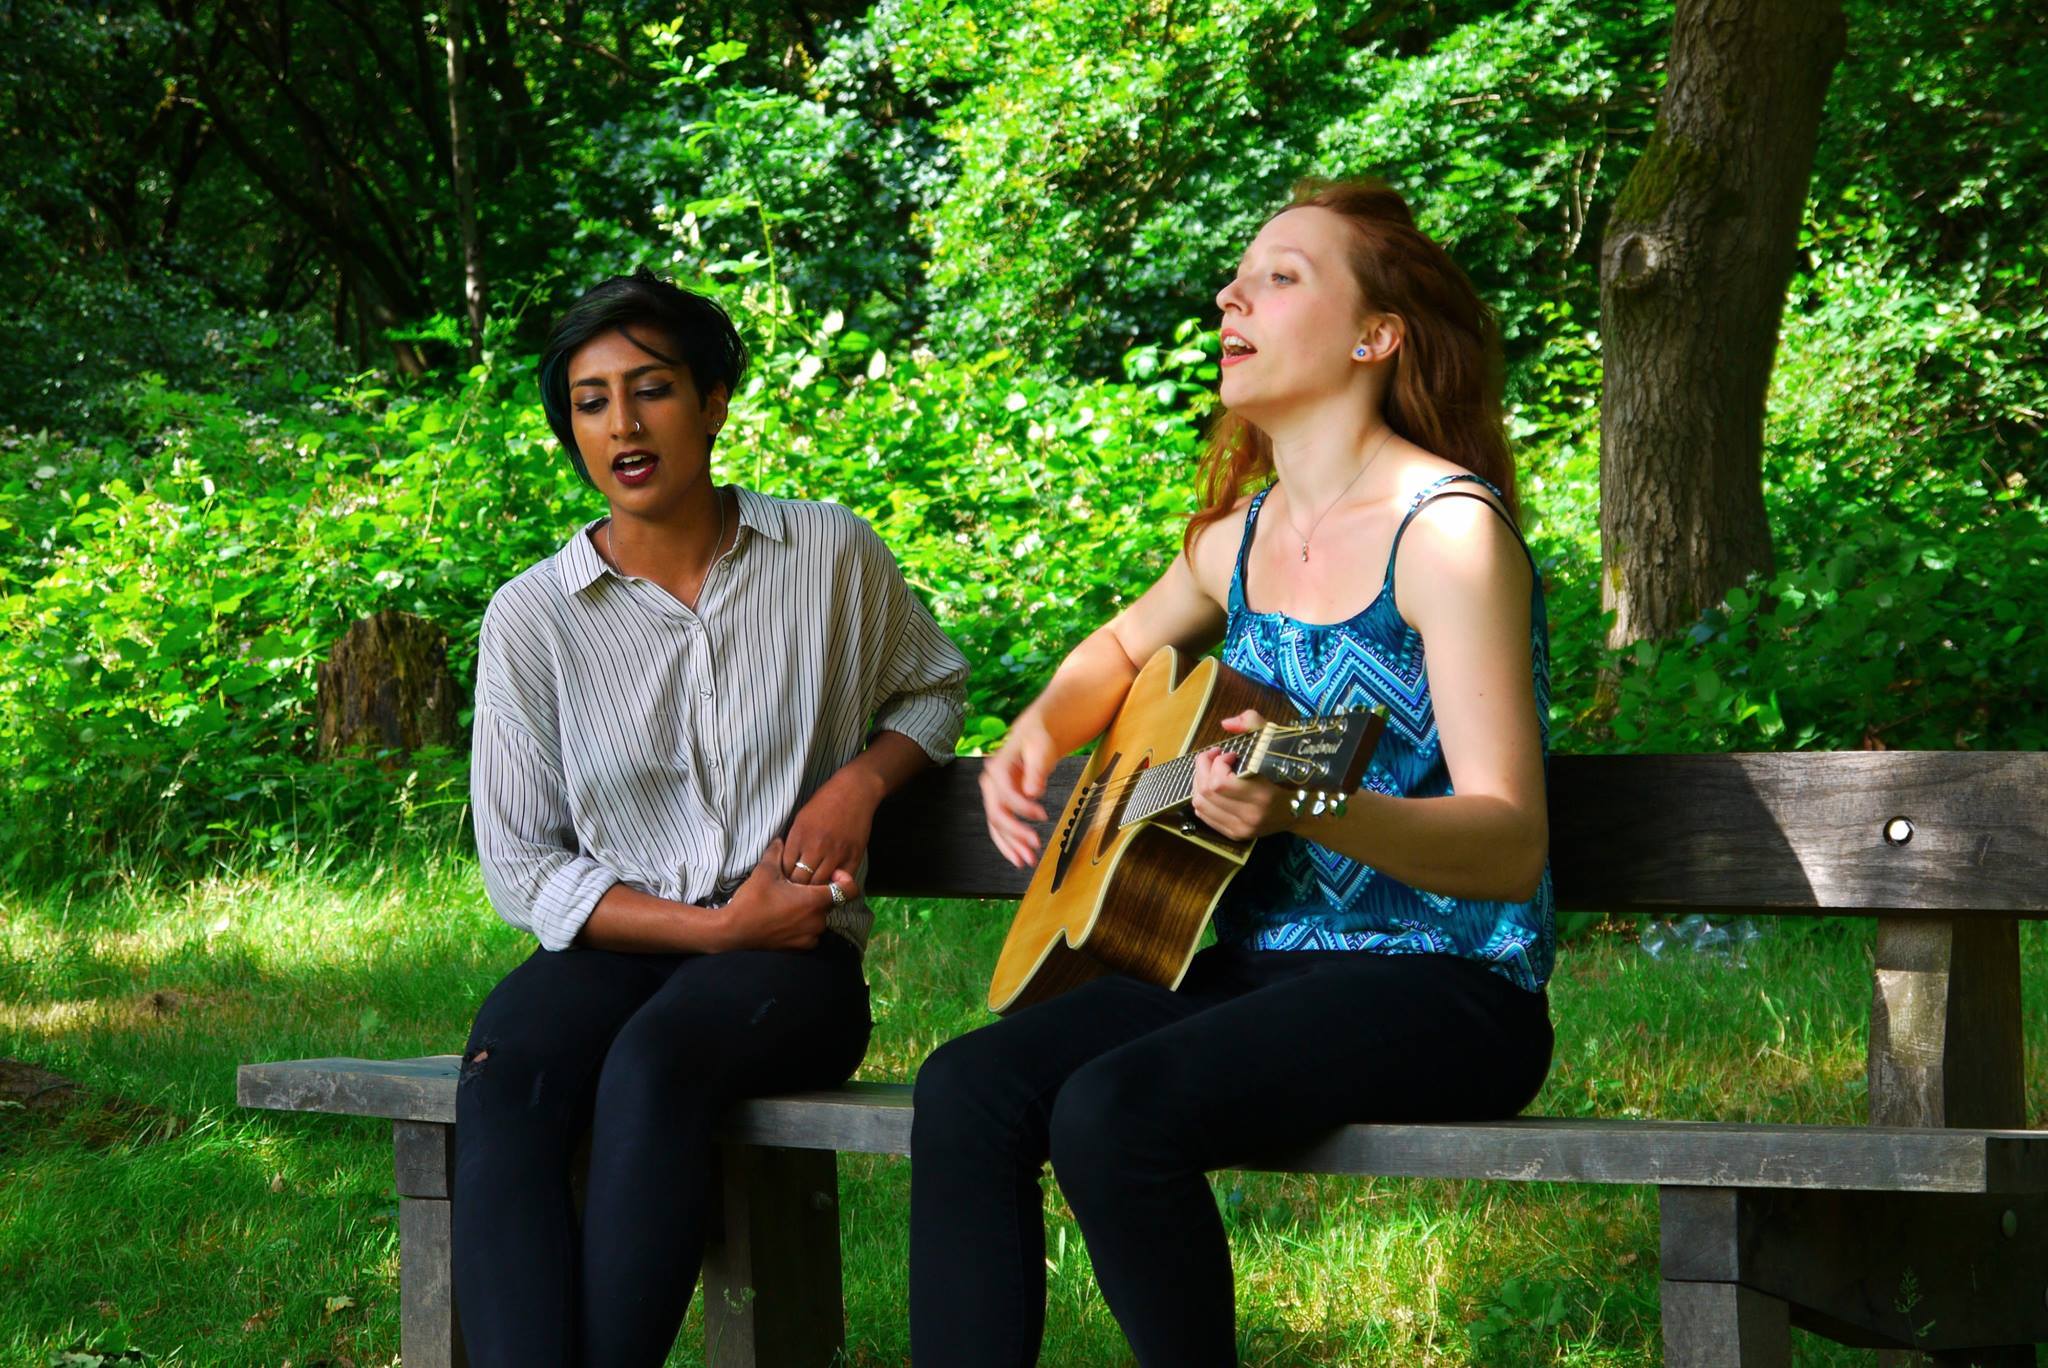 Upcoming indie-folk duo Naz and Ella recognised by BBC - Times Series